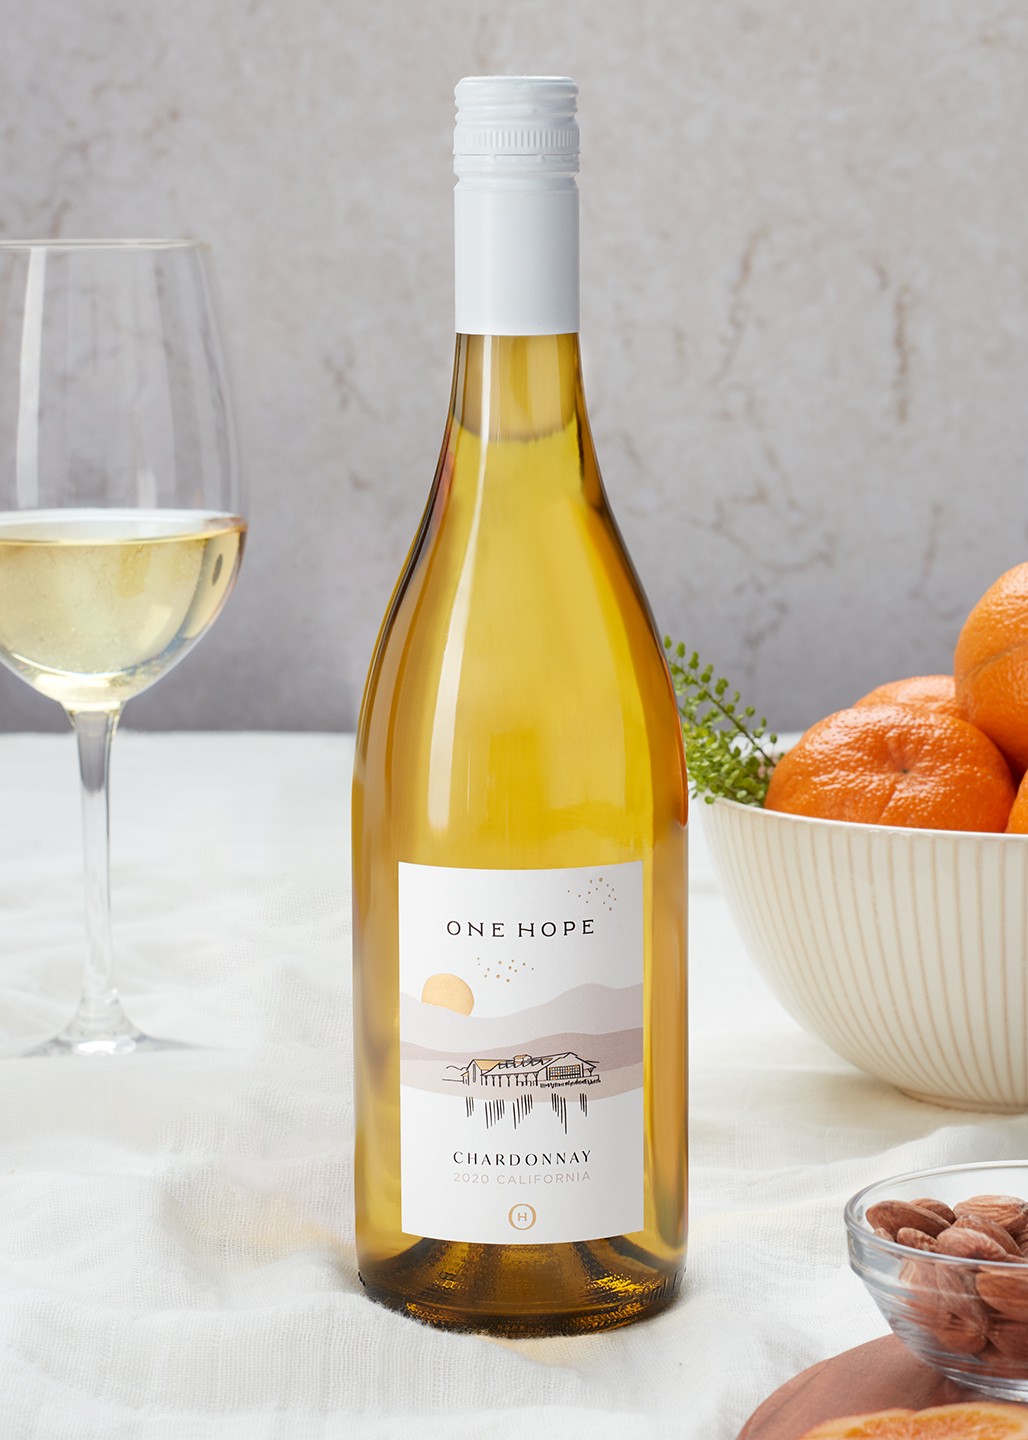 Vintner Chardonnay 2020 White Wine from California by Onehope 750ml